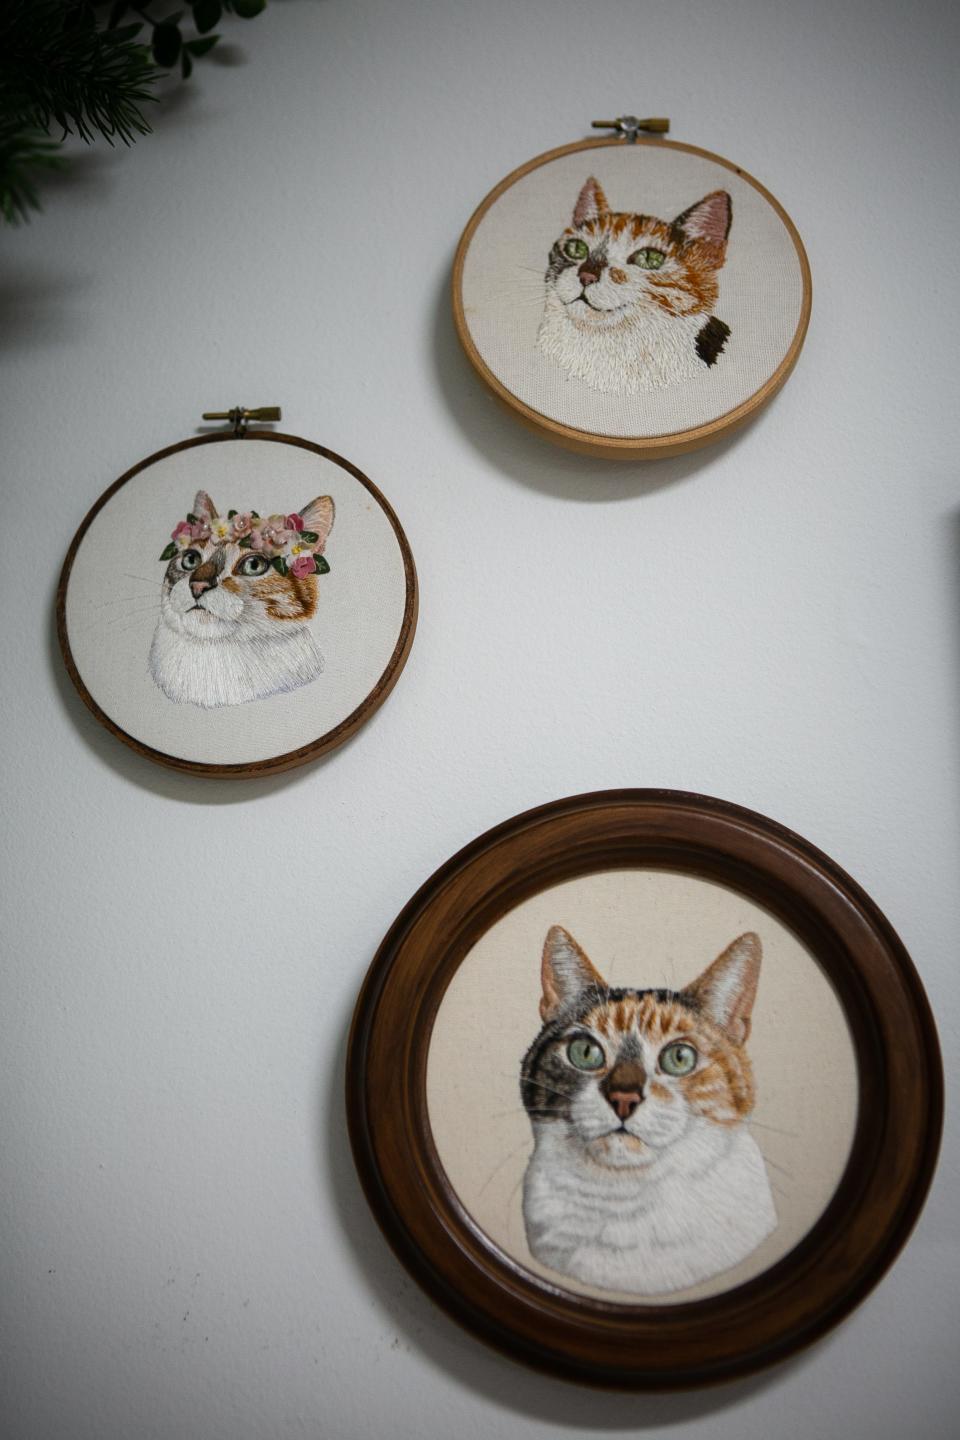 Michelle Staub, of Amelia, aka @StitchingSabbatical, used her cat, Pearl, as a muse for her embroidery. The progression of her work hangs on the walls of her home studio space. The first time she attempted PearlÕs embroidery was in 2014, then again in 2018 and once more again recently. Staub has become well-known throughout social media for her embroidered lifelike pet portraits. She also just had a new book publish on November 15, focused on pet portrait embroidery, full of patterns and how-tos.